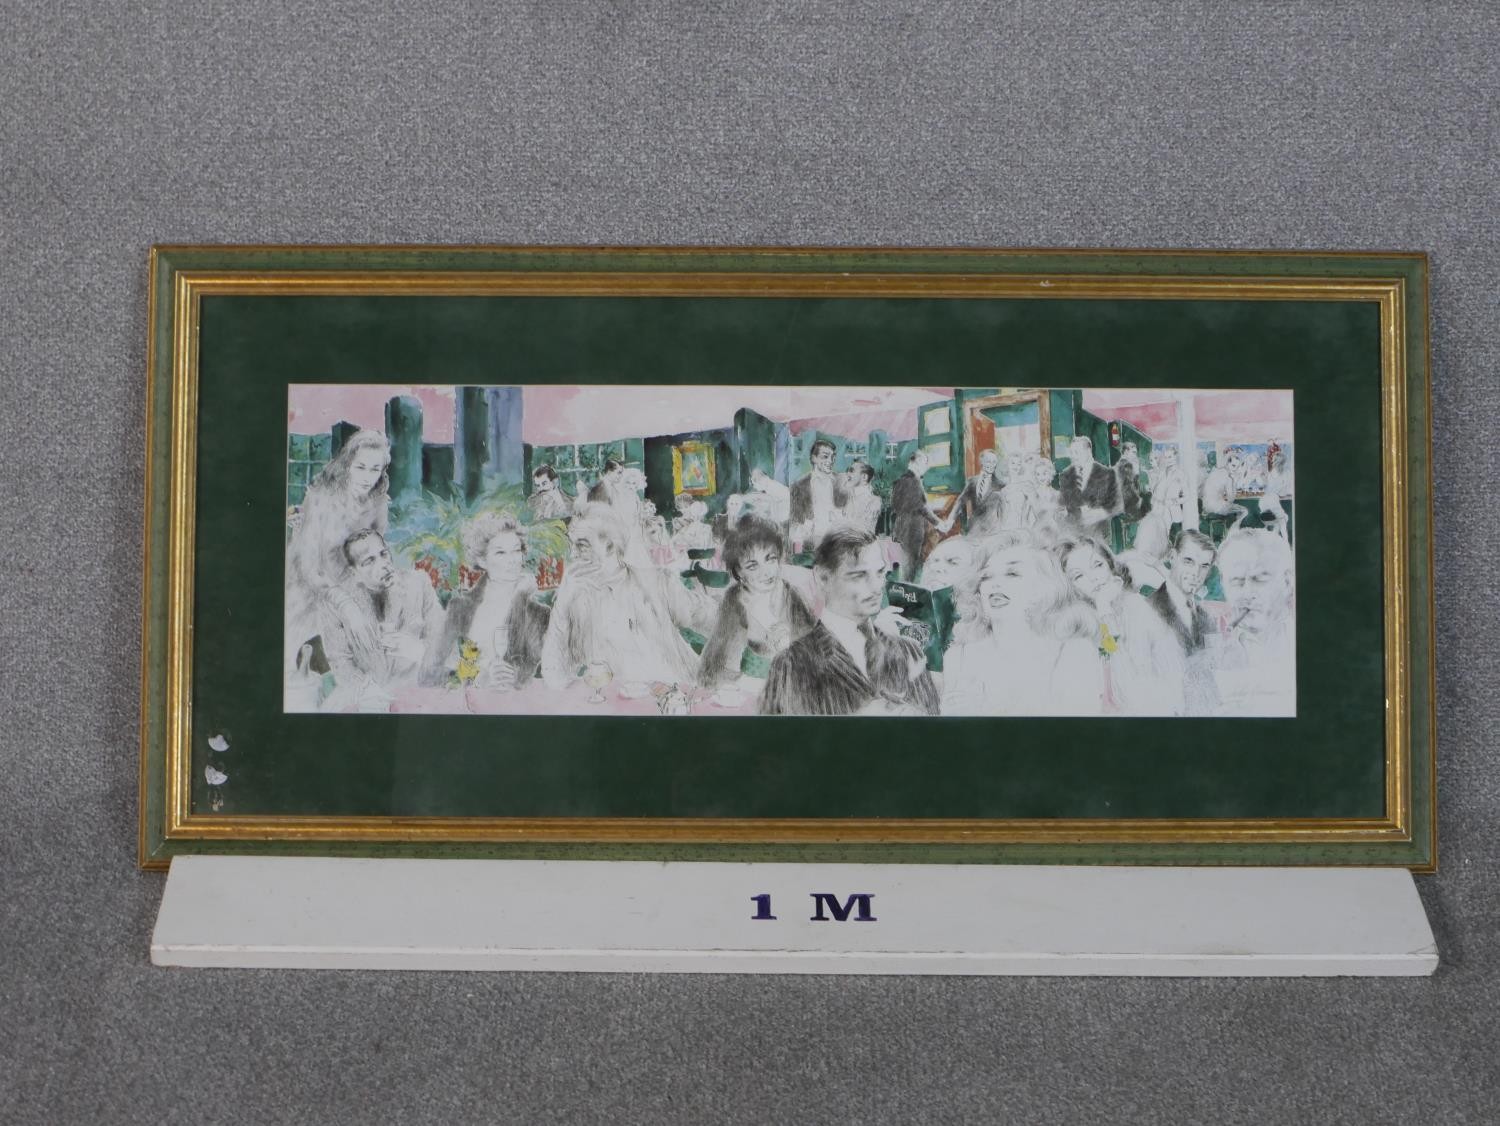 LeRoy Neiman (1921-2012, American), Polo Lounge, lithograph on paper. H.52 W.106cm - Image 3 of 7